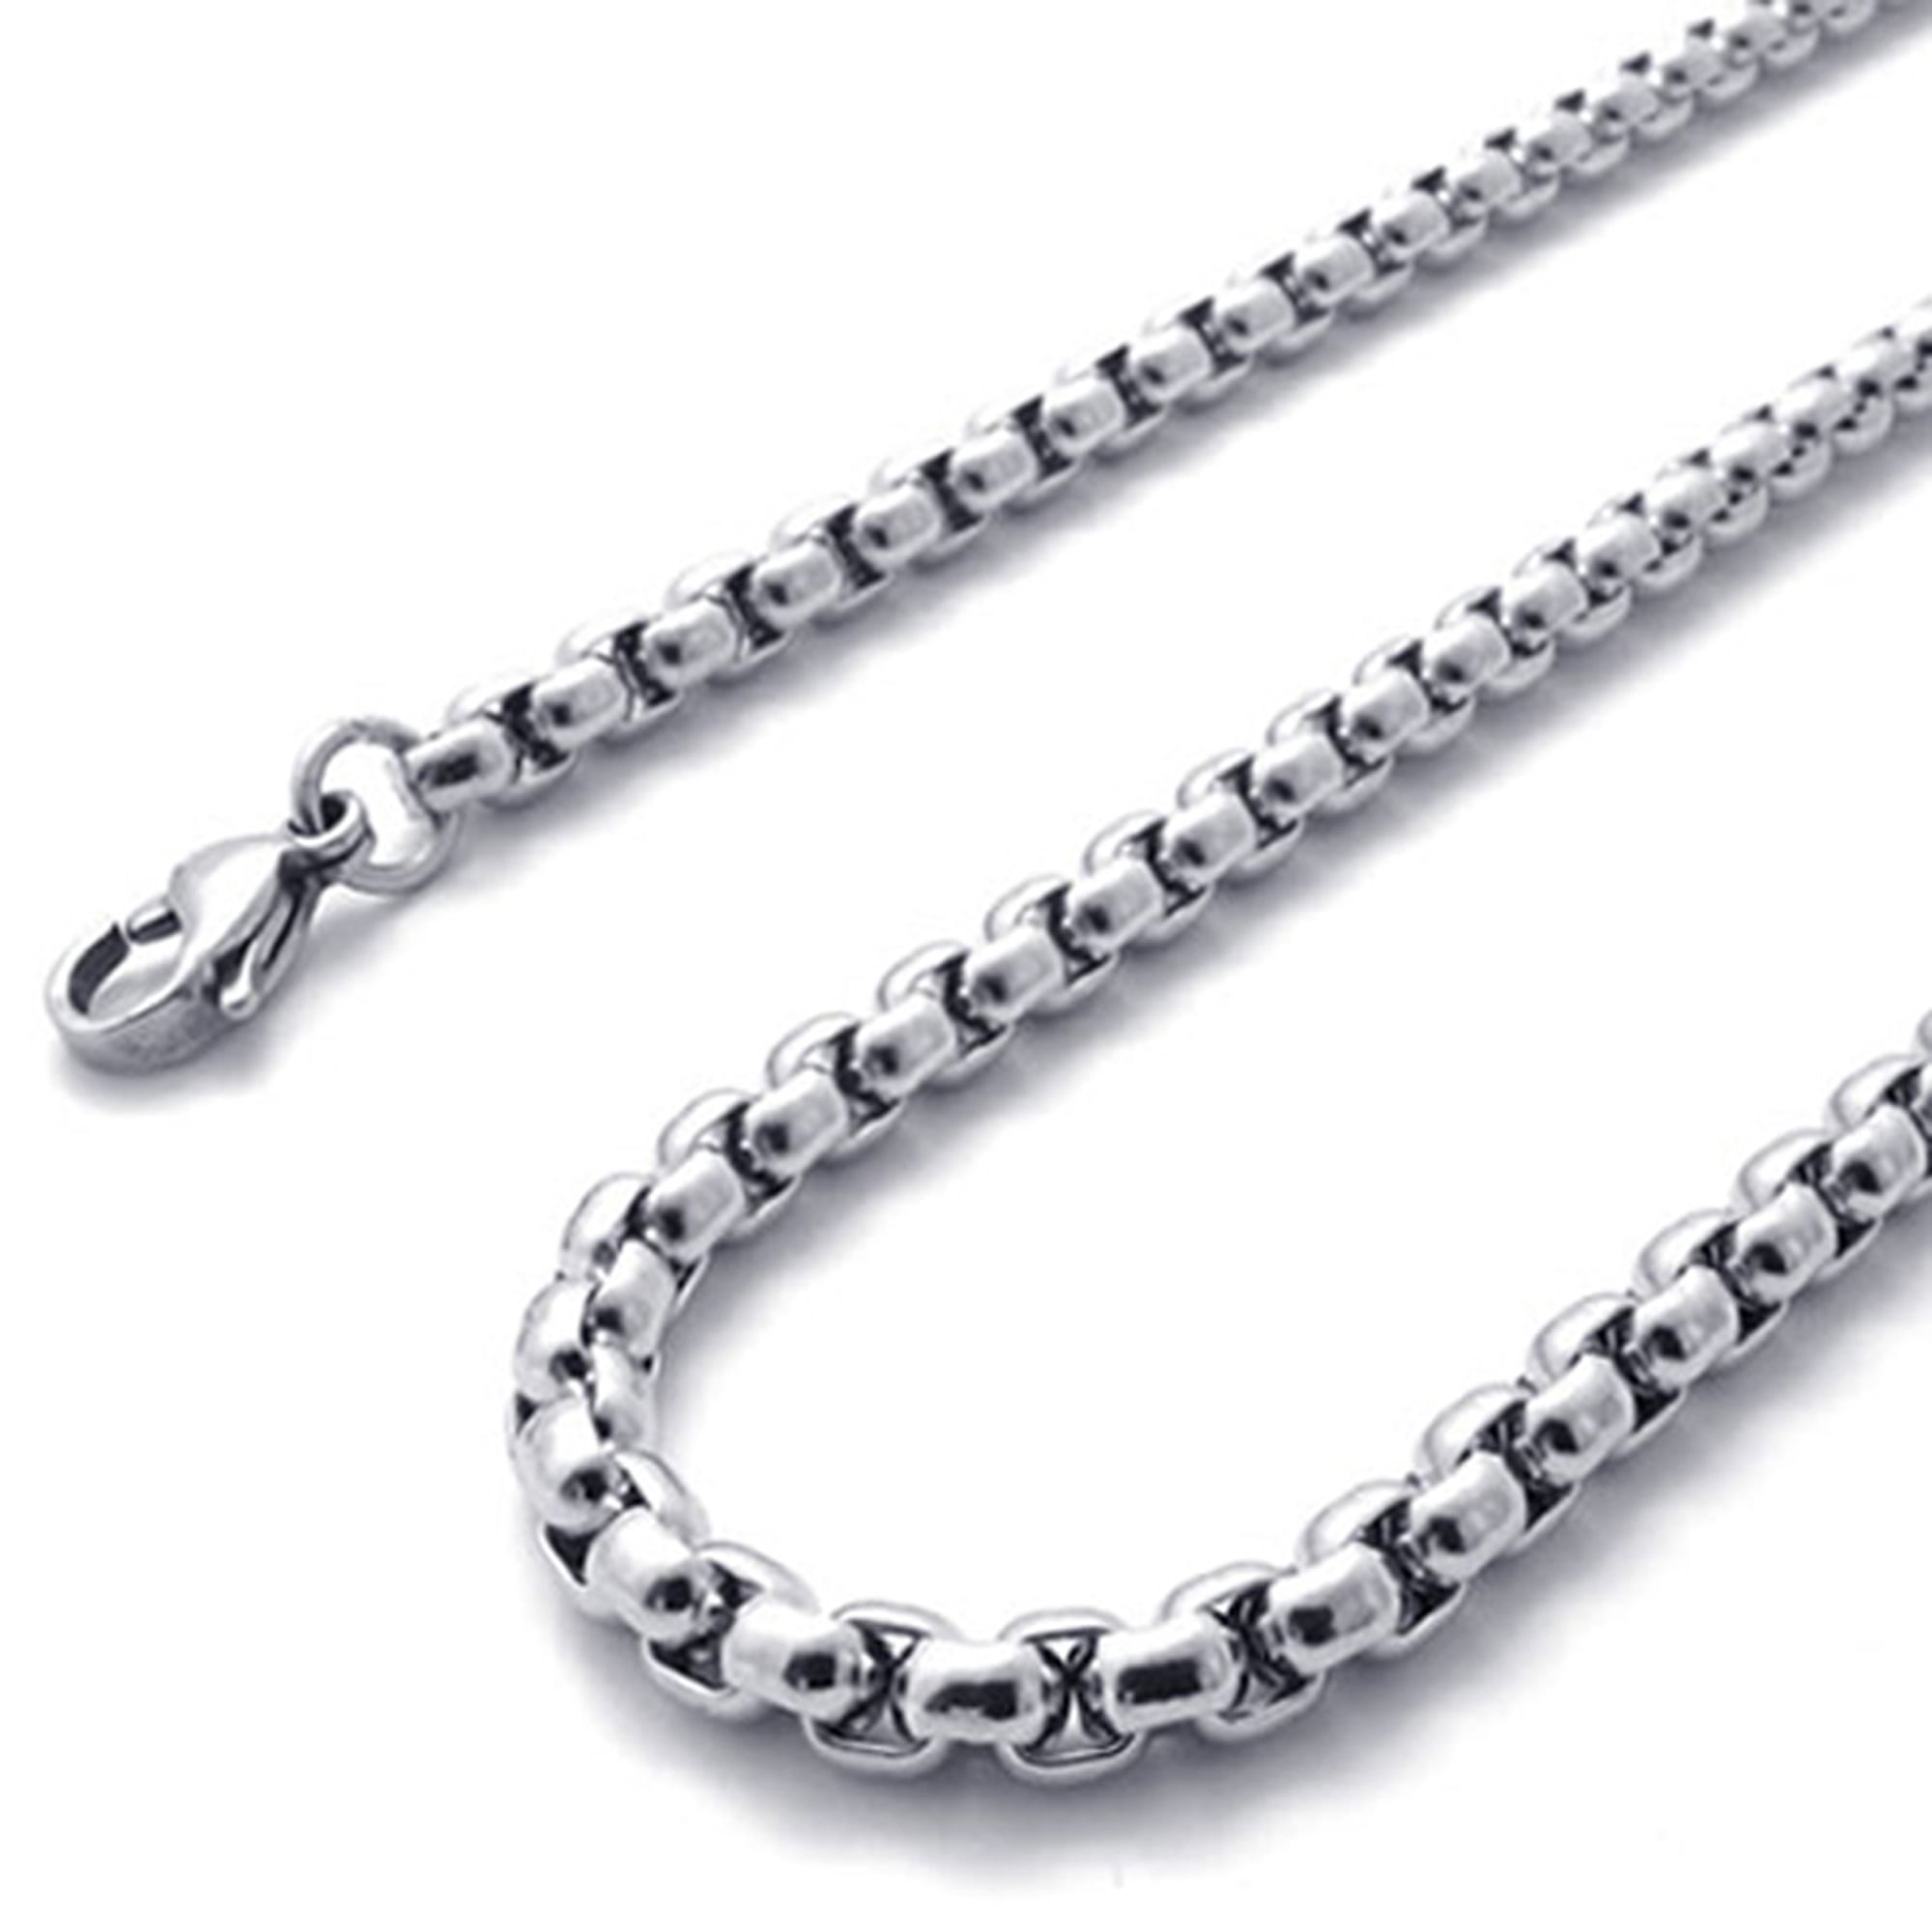 18-40"MEN Stainless Steel 4mm Black Smooth Classic Box Link Chain Necklace 